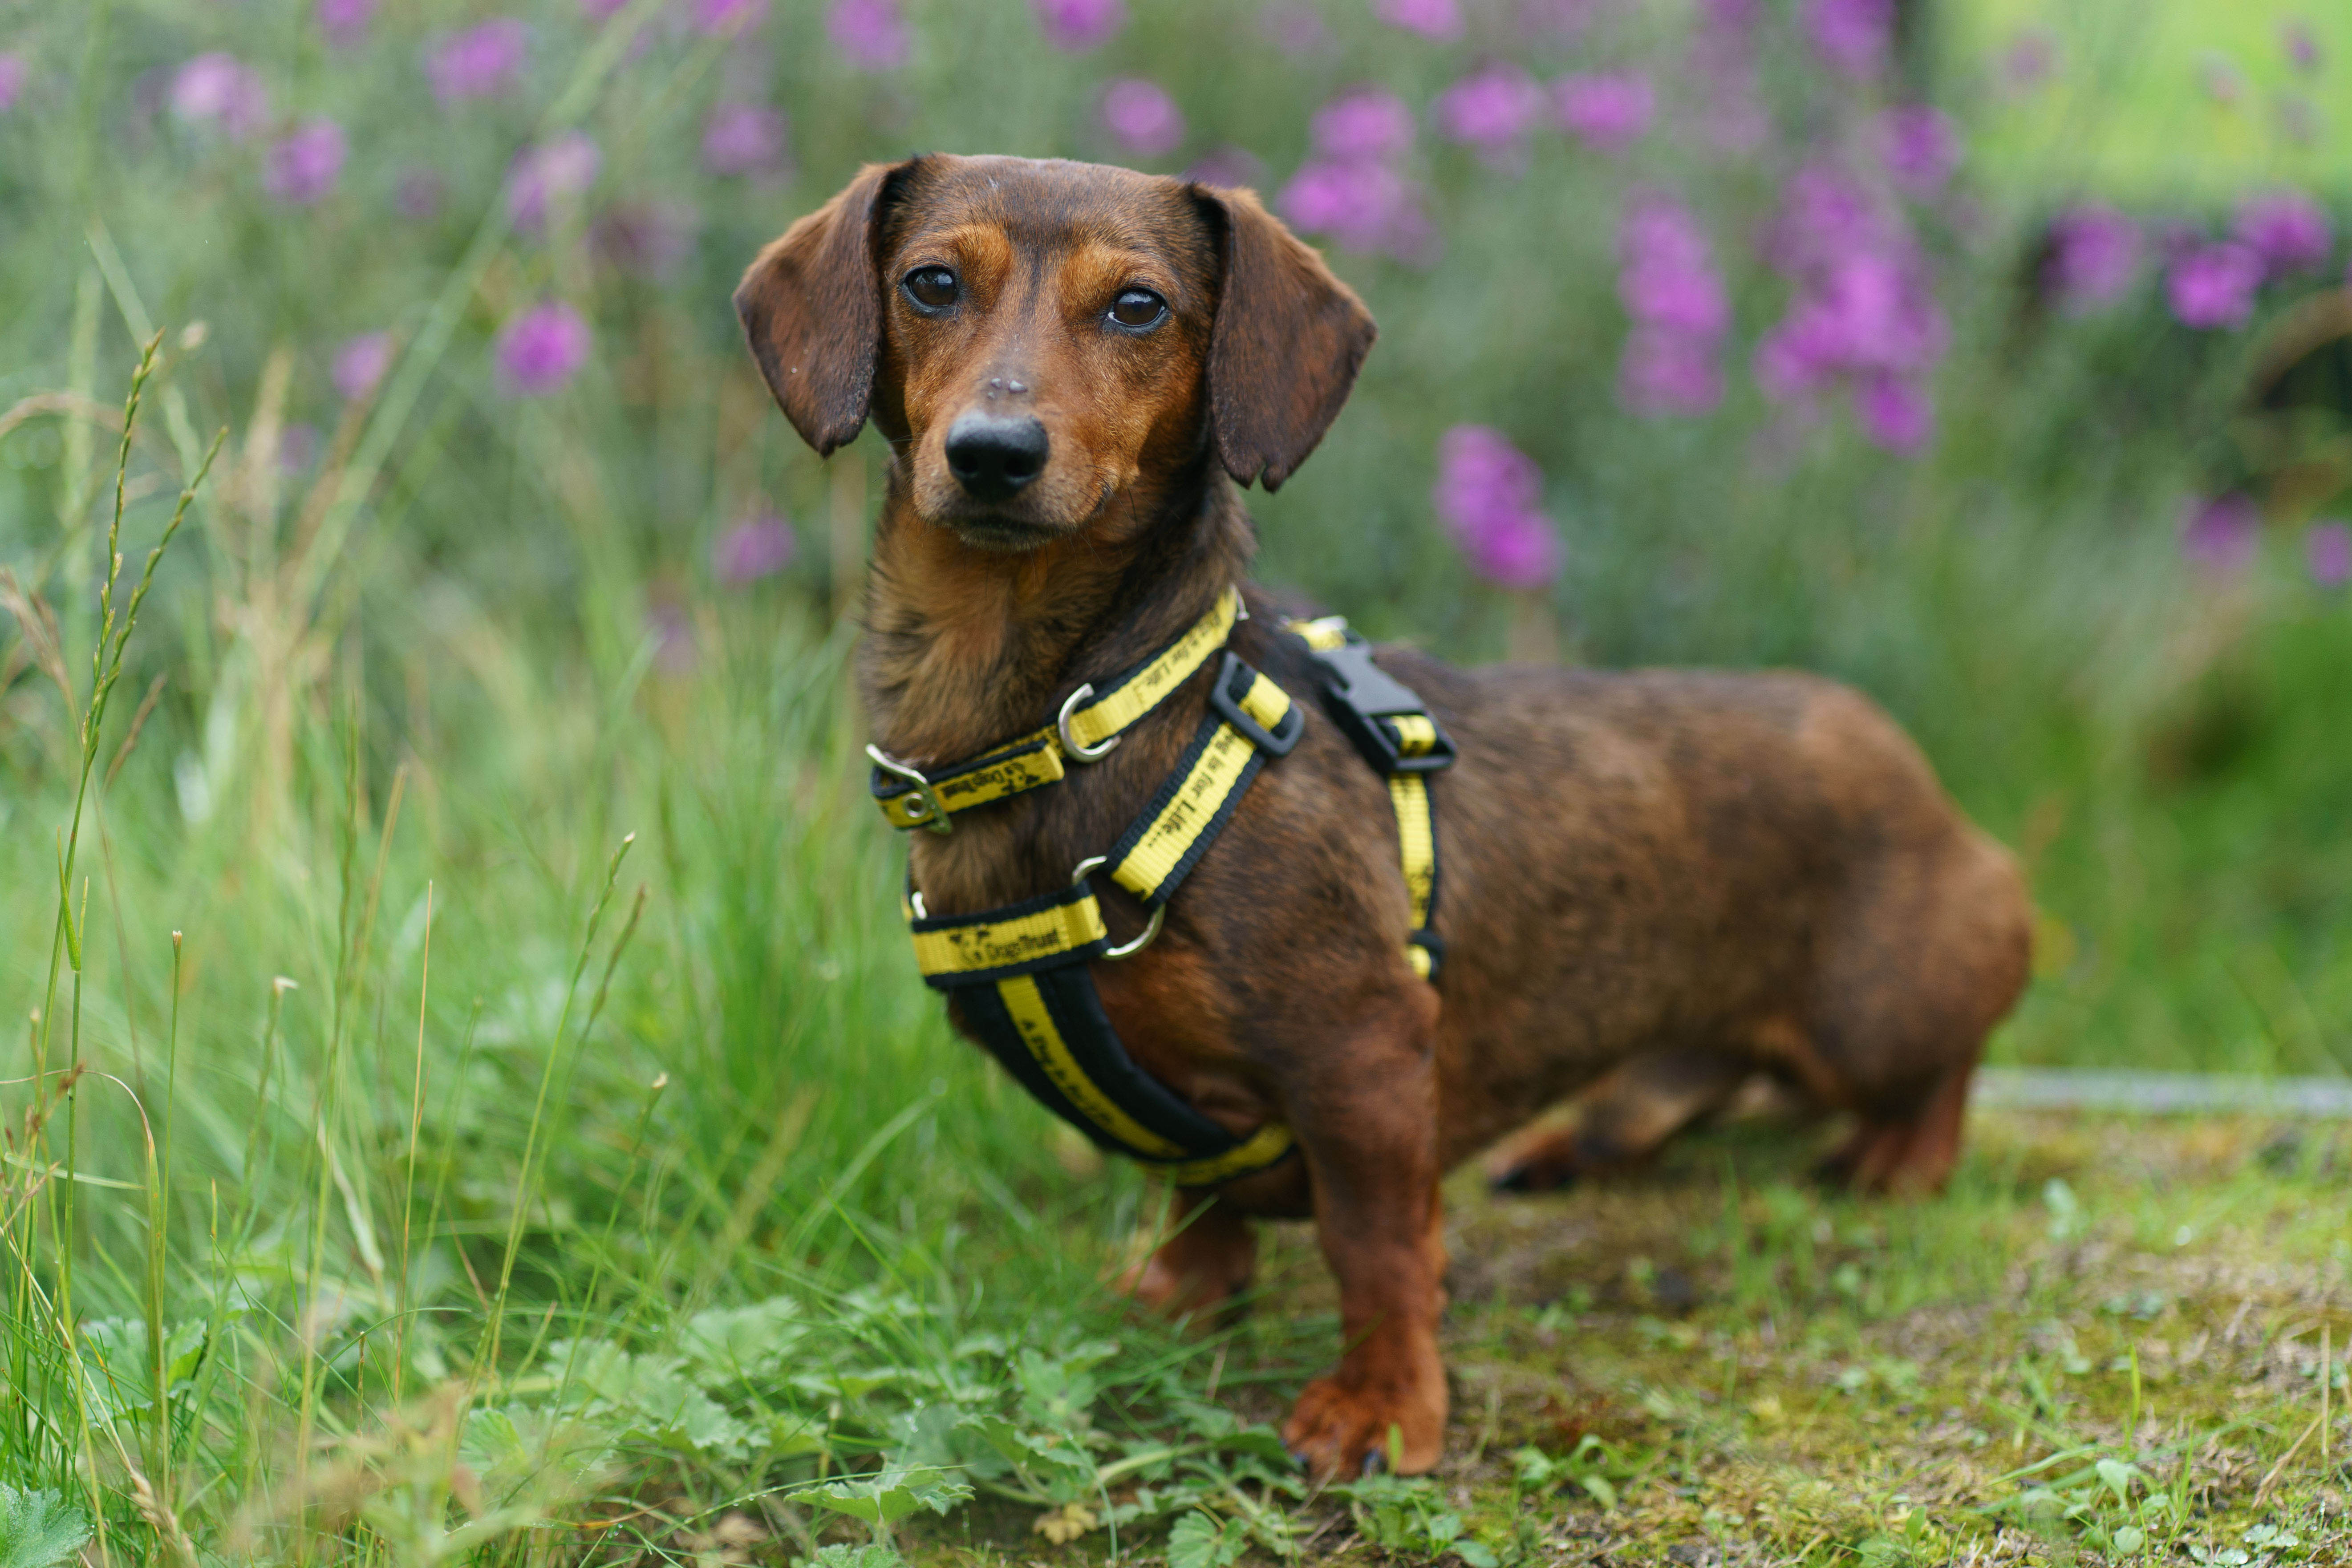 Family ‘Dogfished’ by Dachshund Doggy Dealer